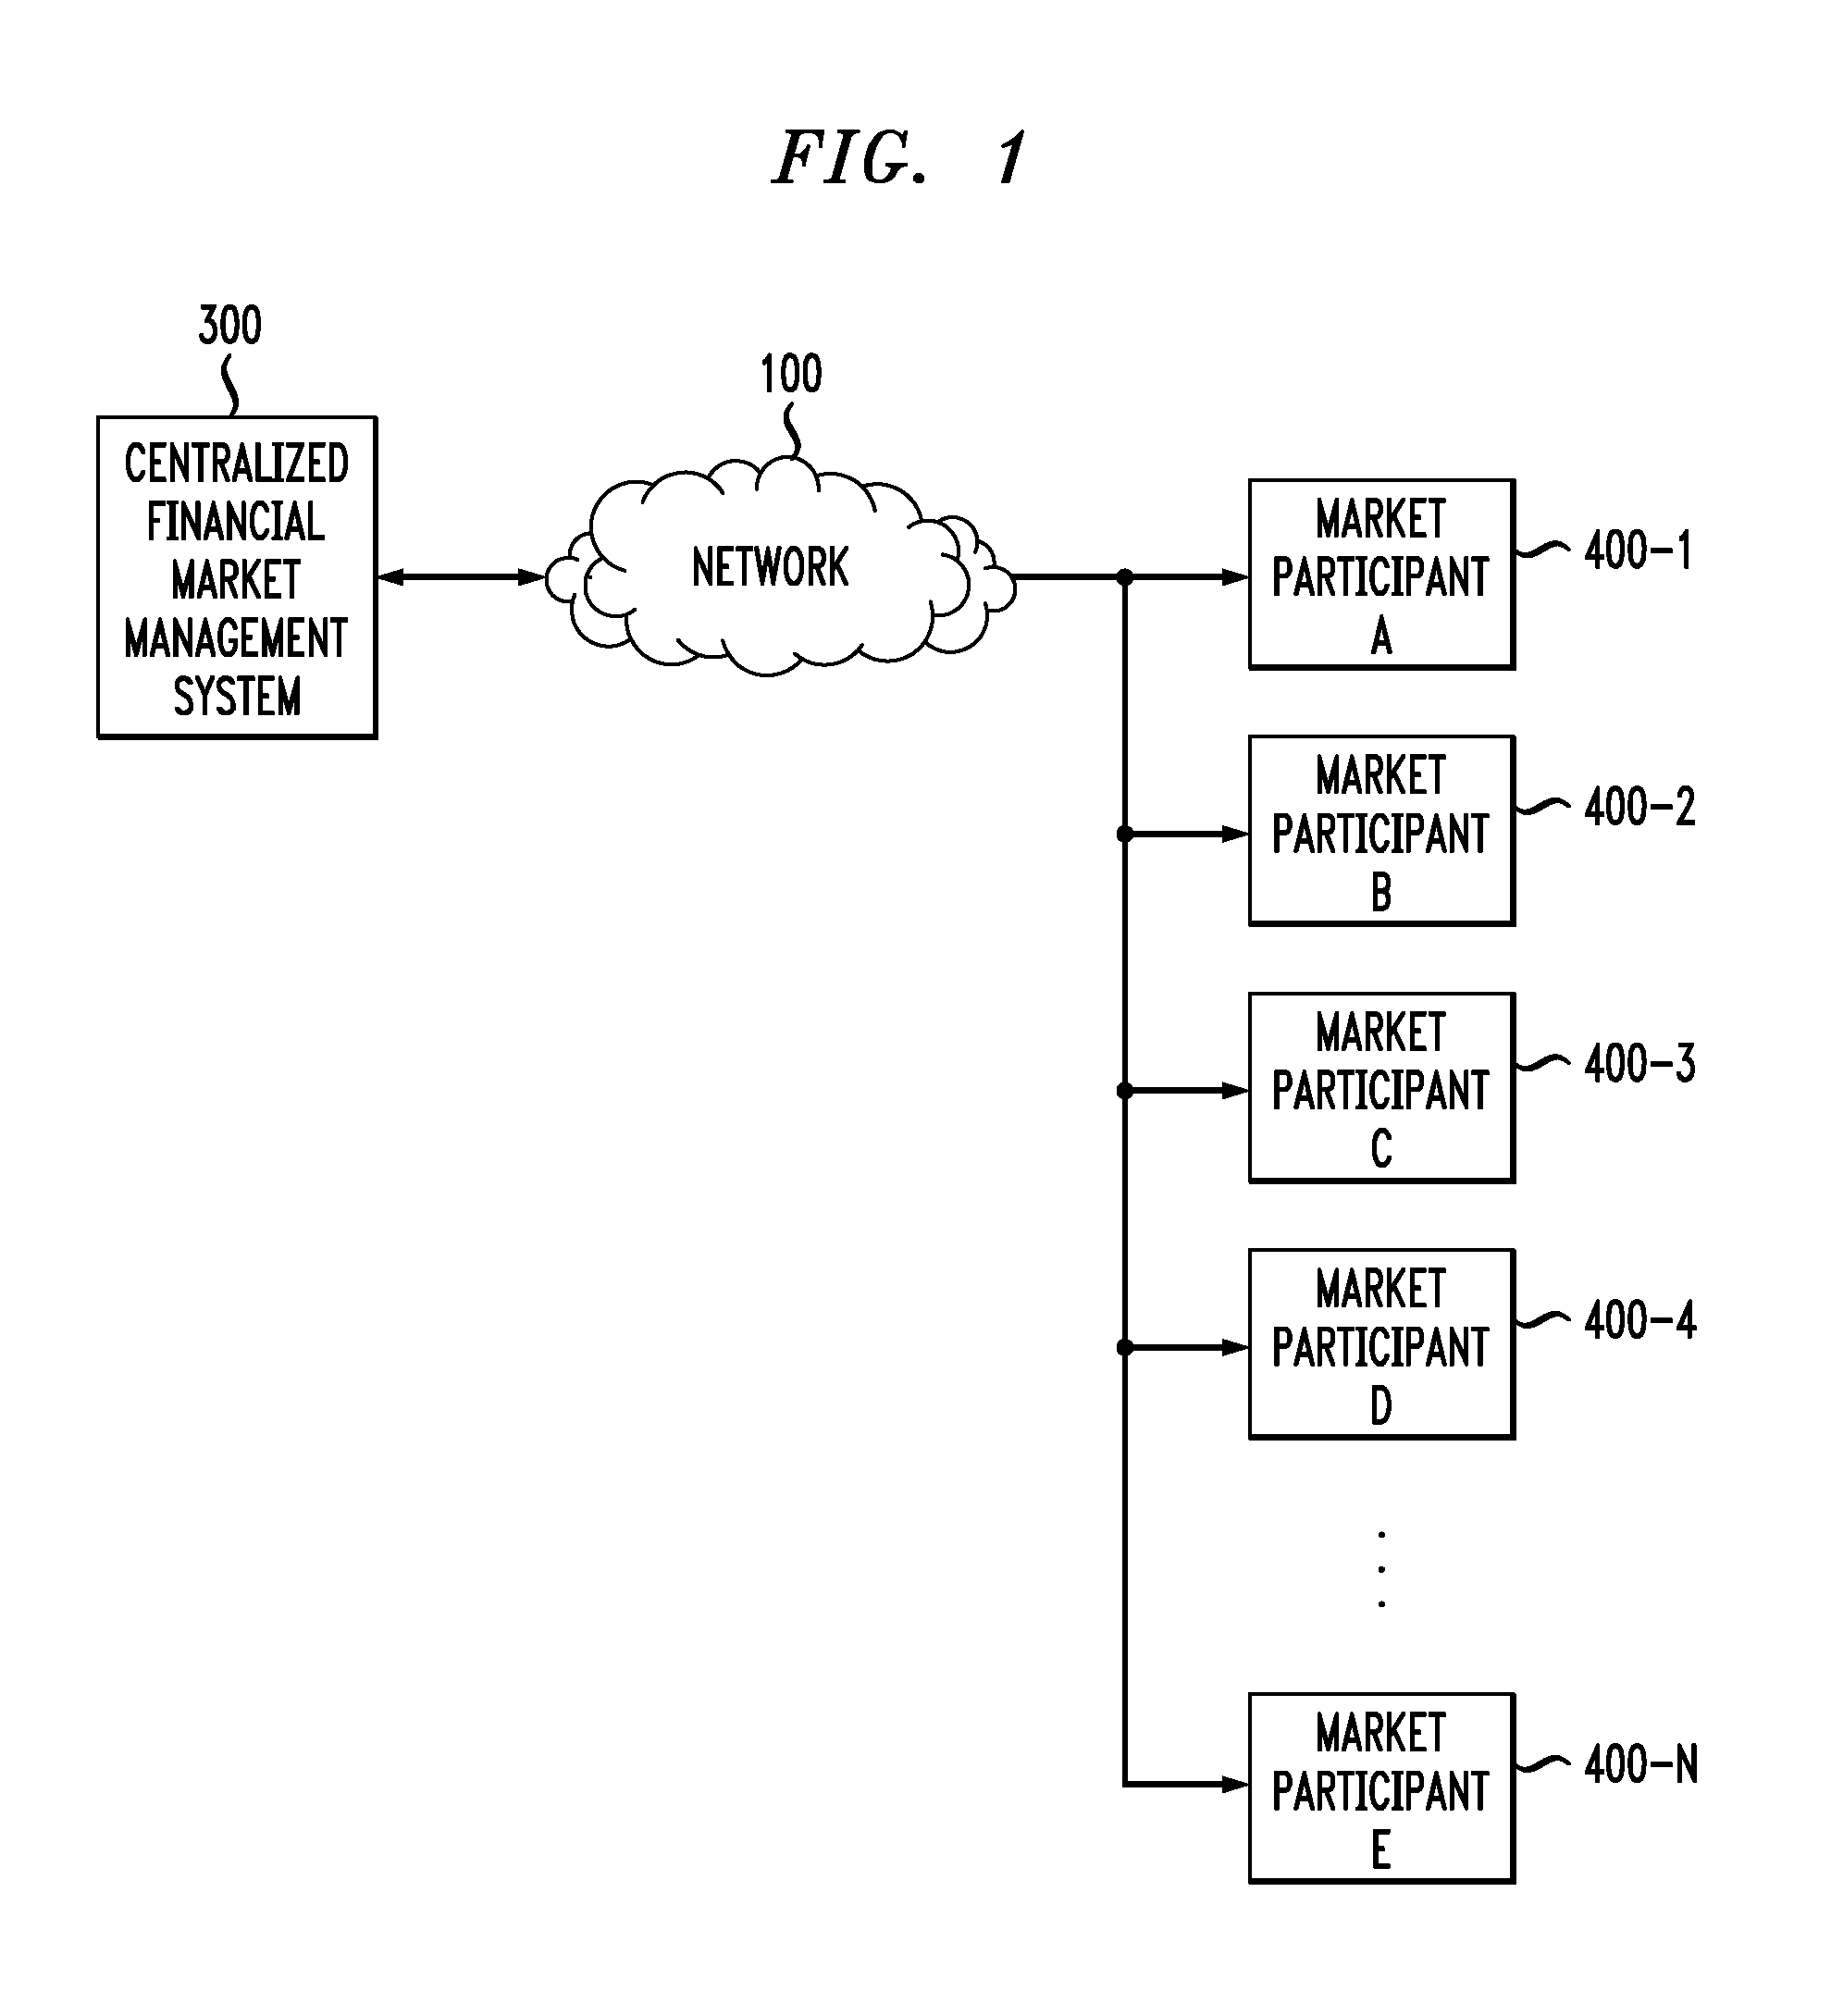 Method and Apparatus for Network Marketing of Financial Securities